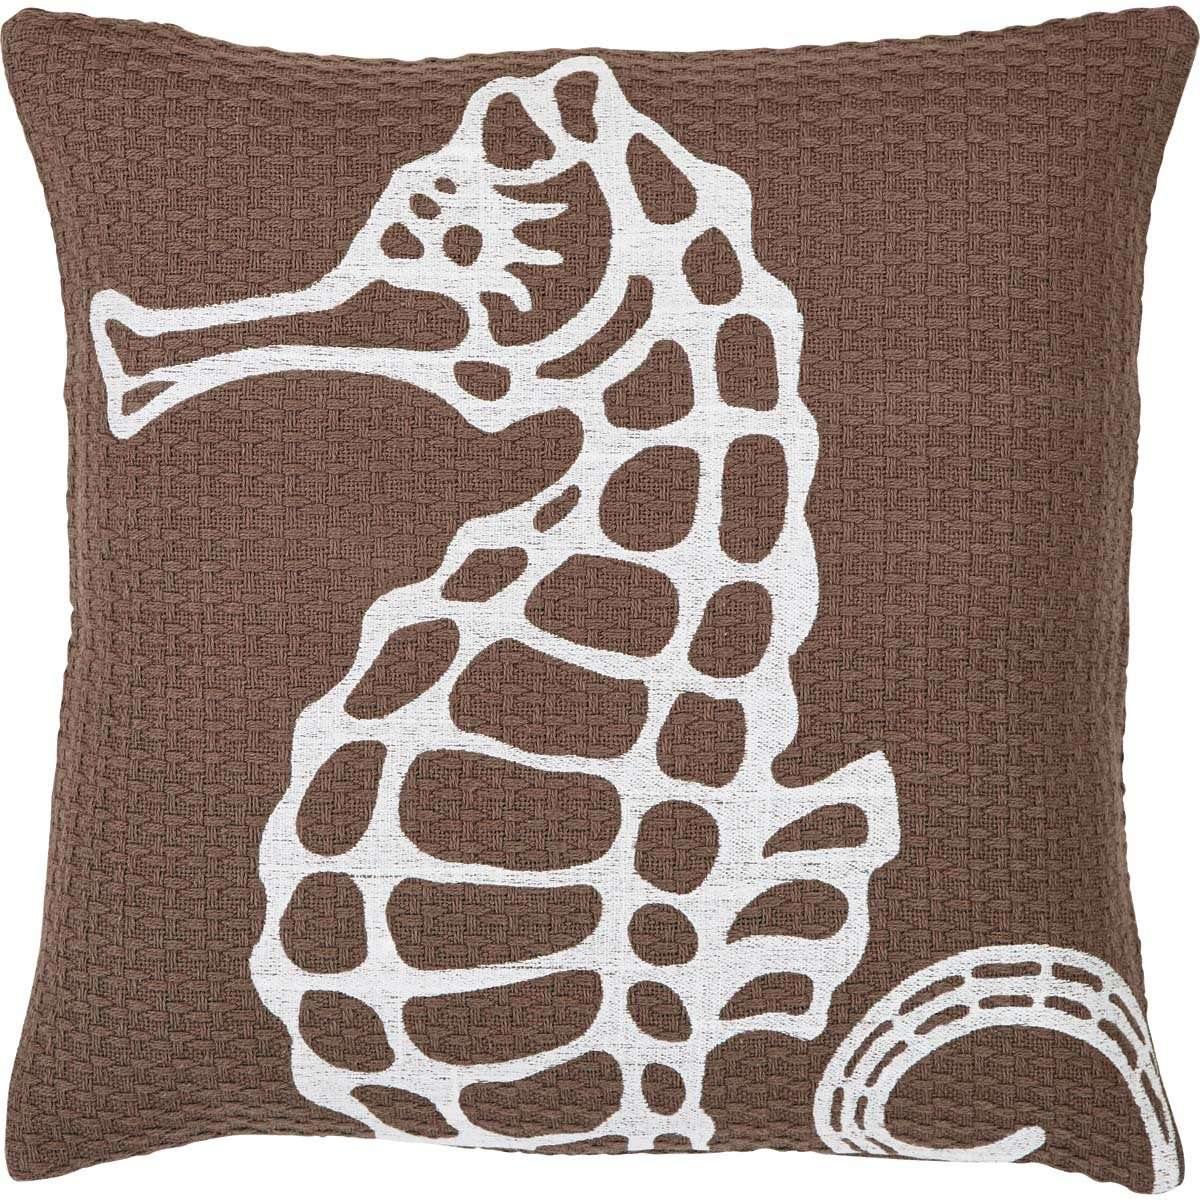 Embroidered Seahorse Pillow 18x18 - The Fox Decor